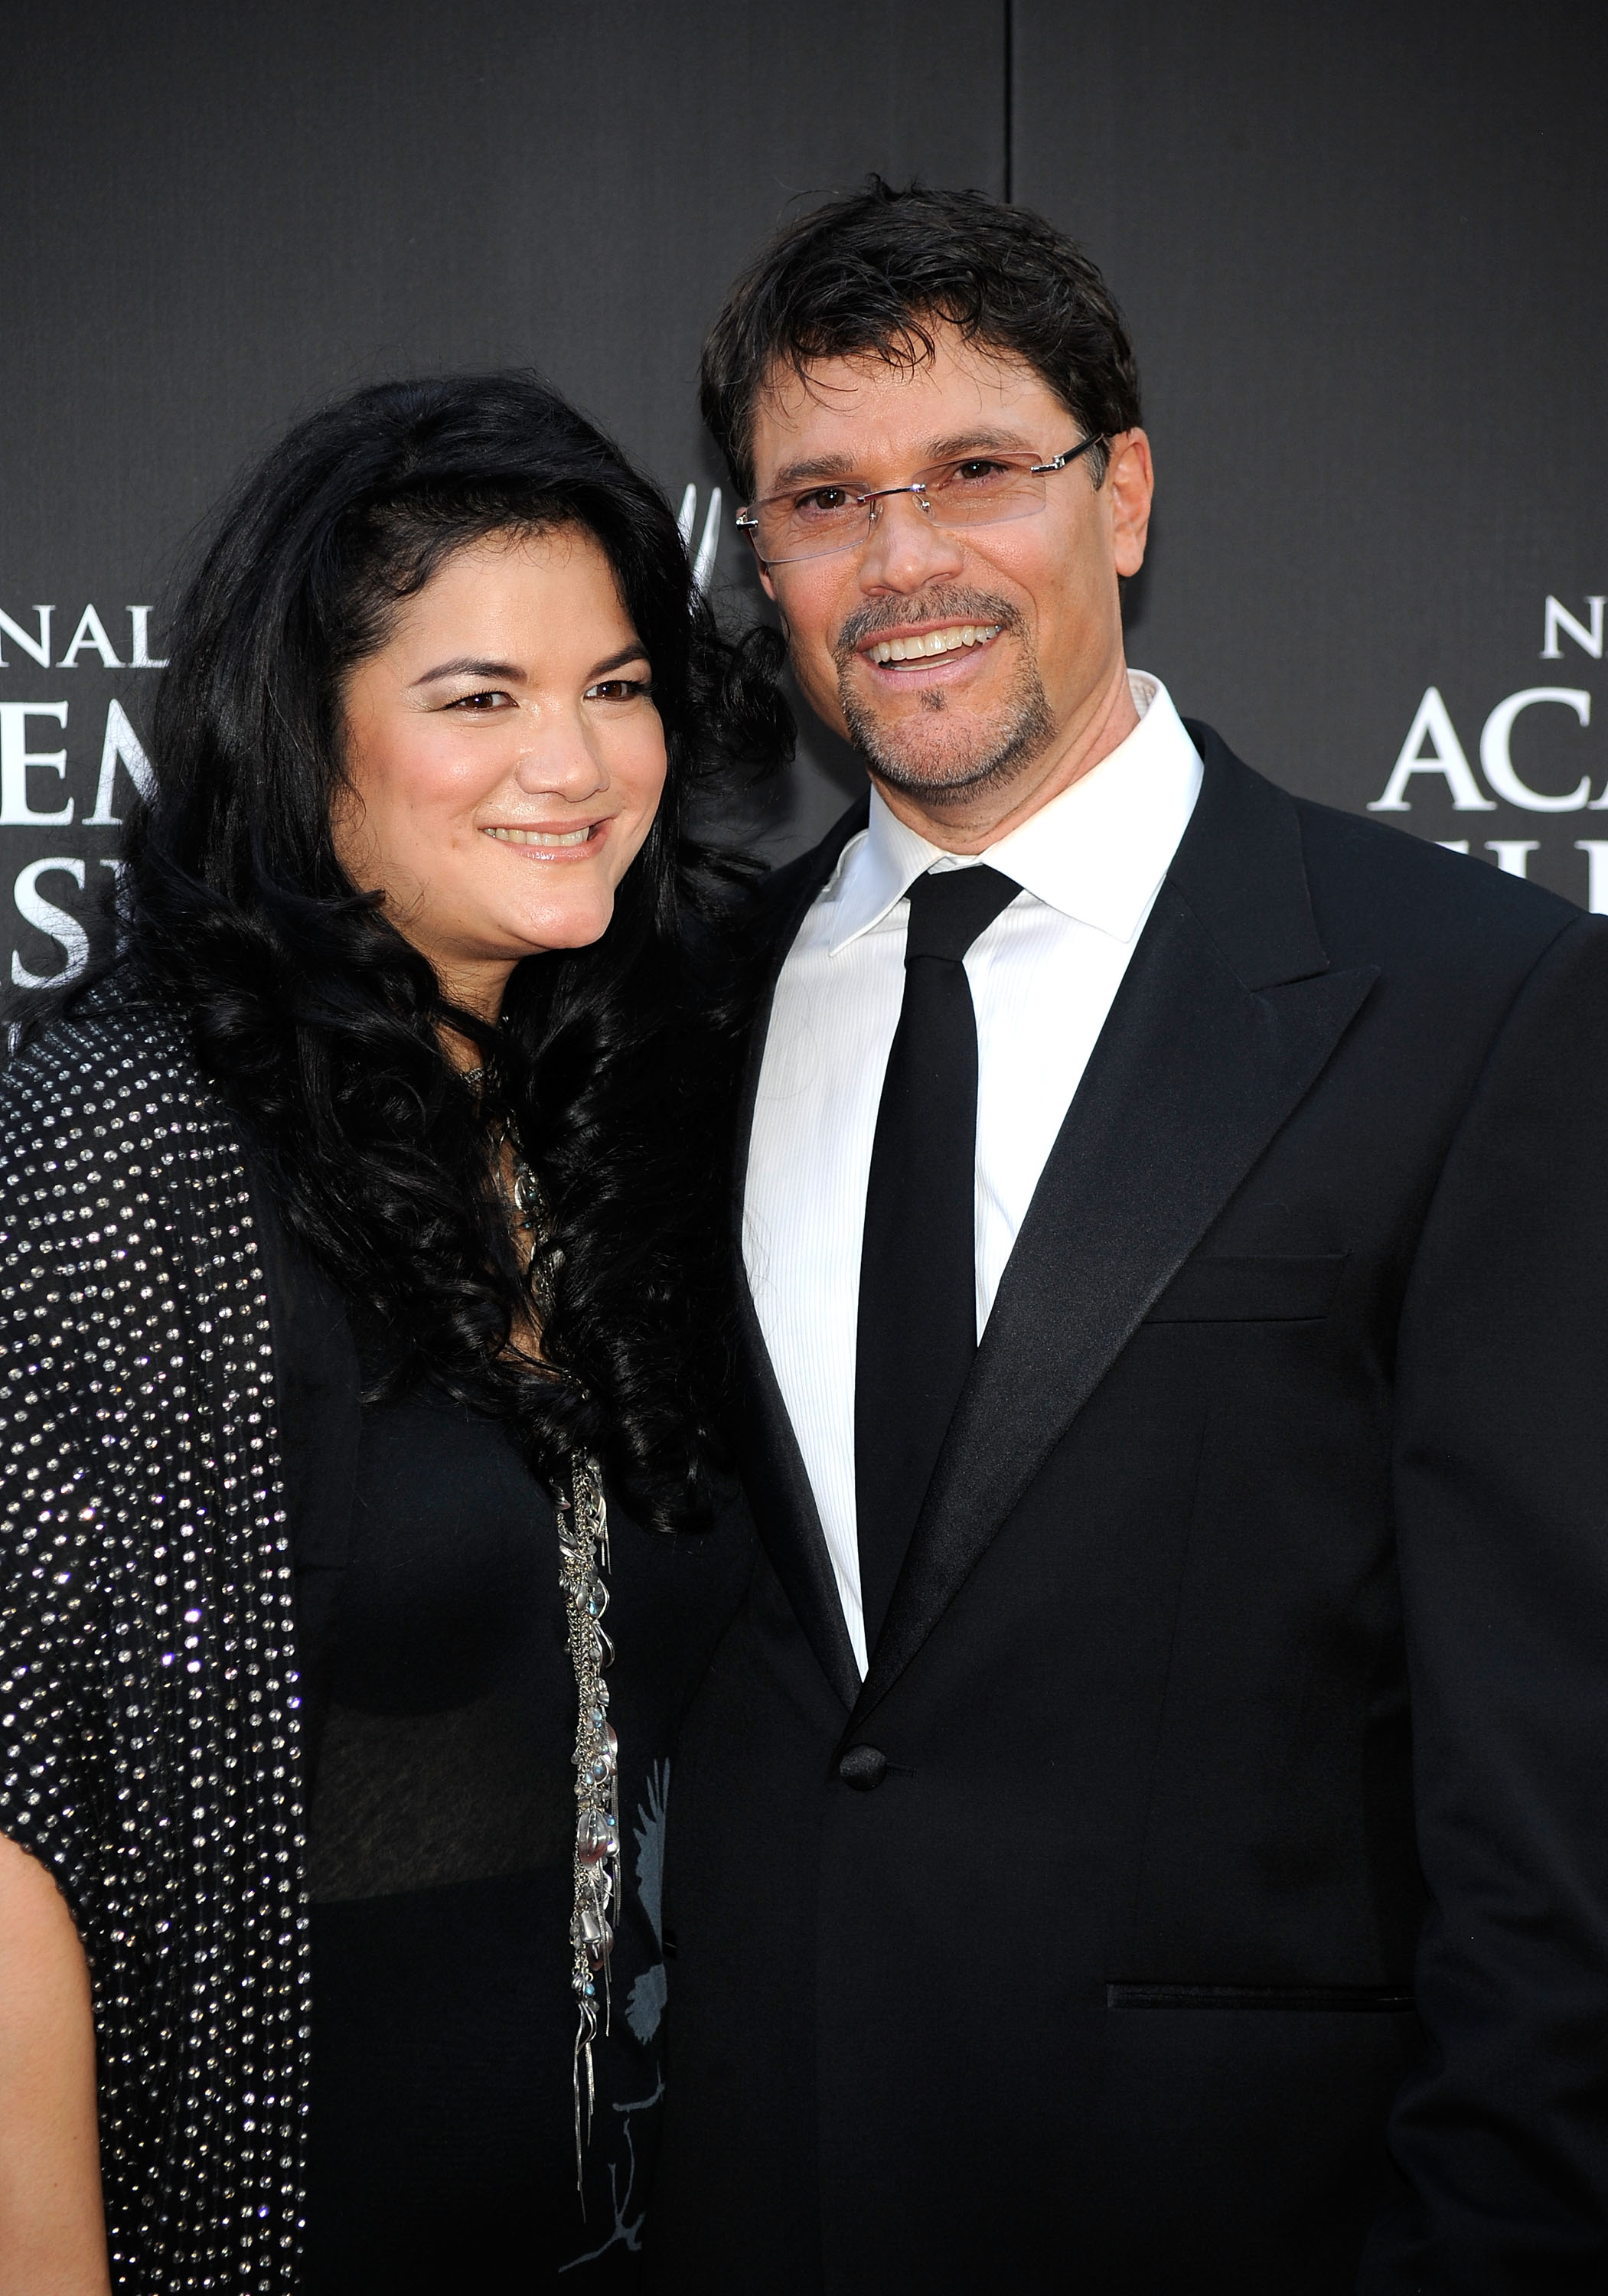 Peter Reckell and Actress Kelly Moneymaker at The Orpheum Theatre on August 30, 2009 in Los Angeles, California | Source: Getty Images